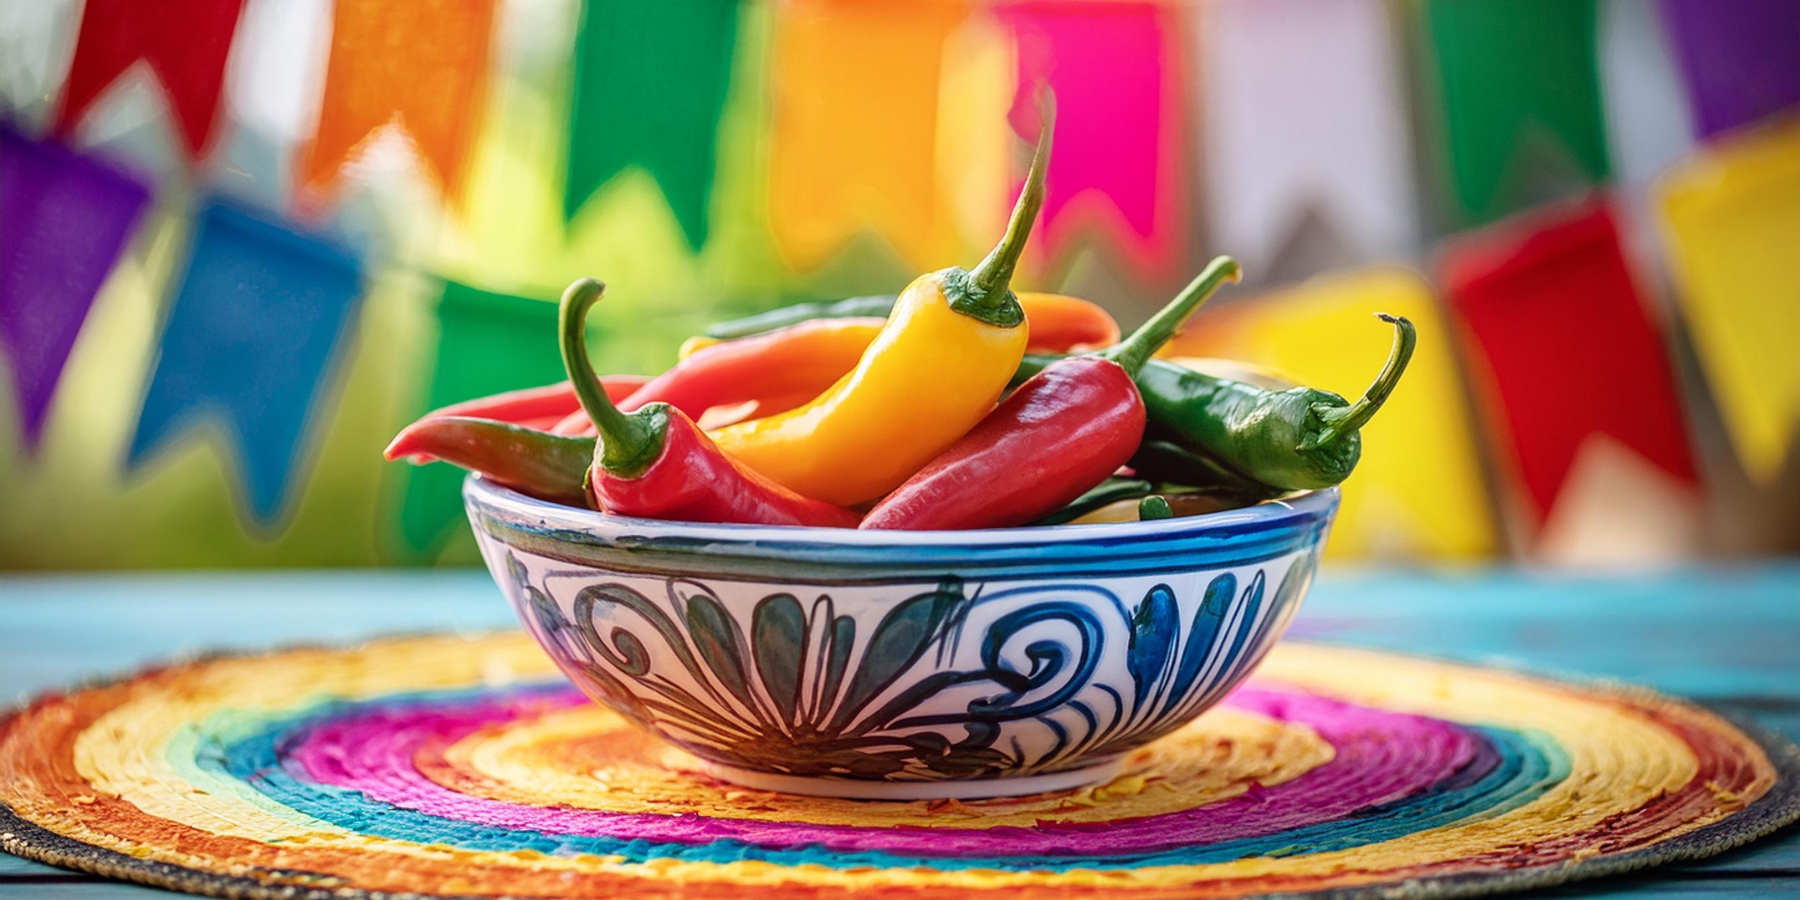 A close-up of a bowl of colourful chillies